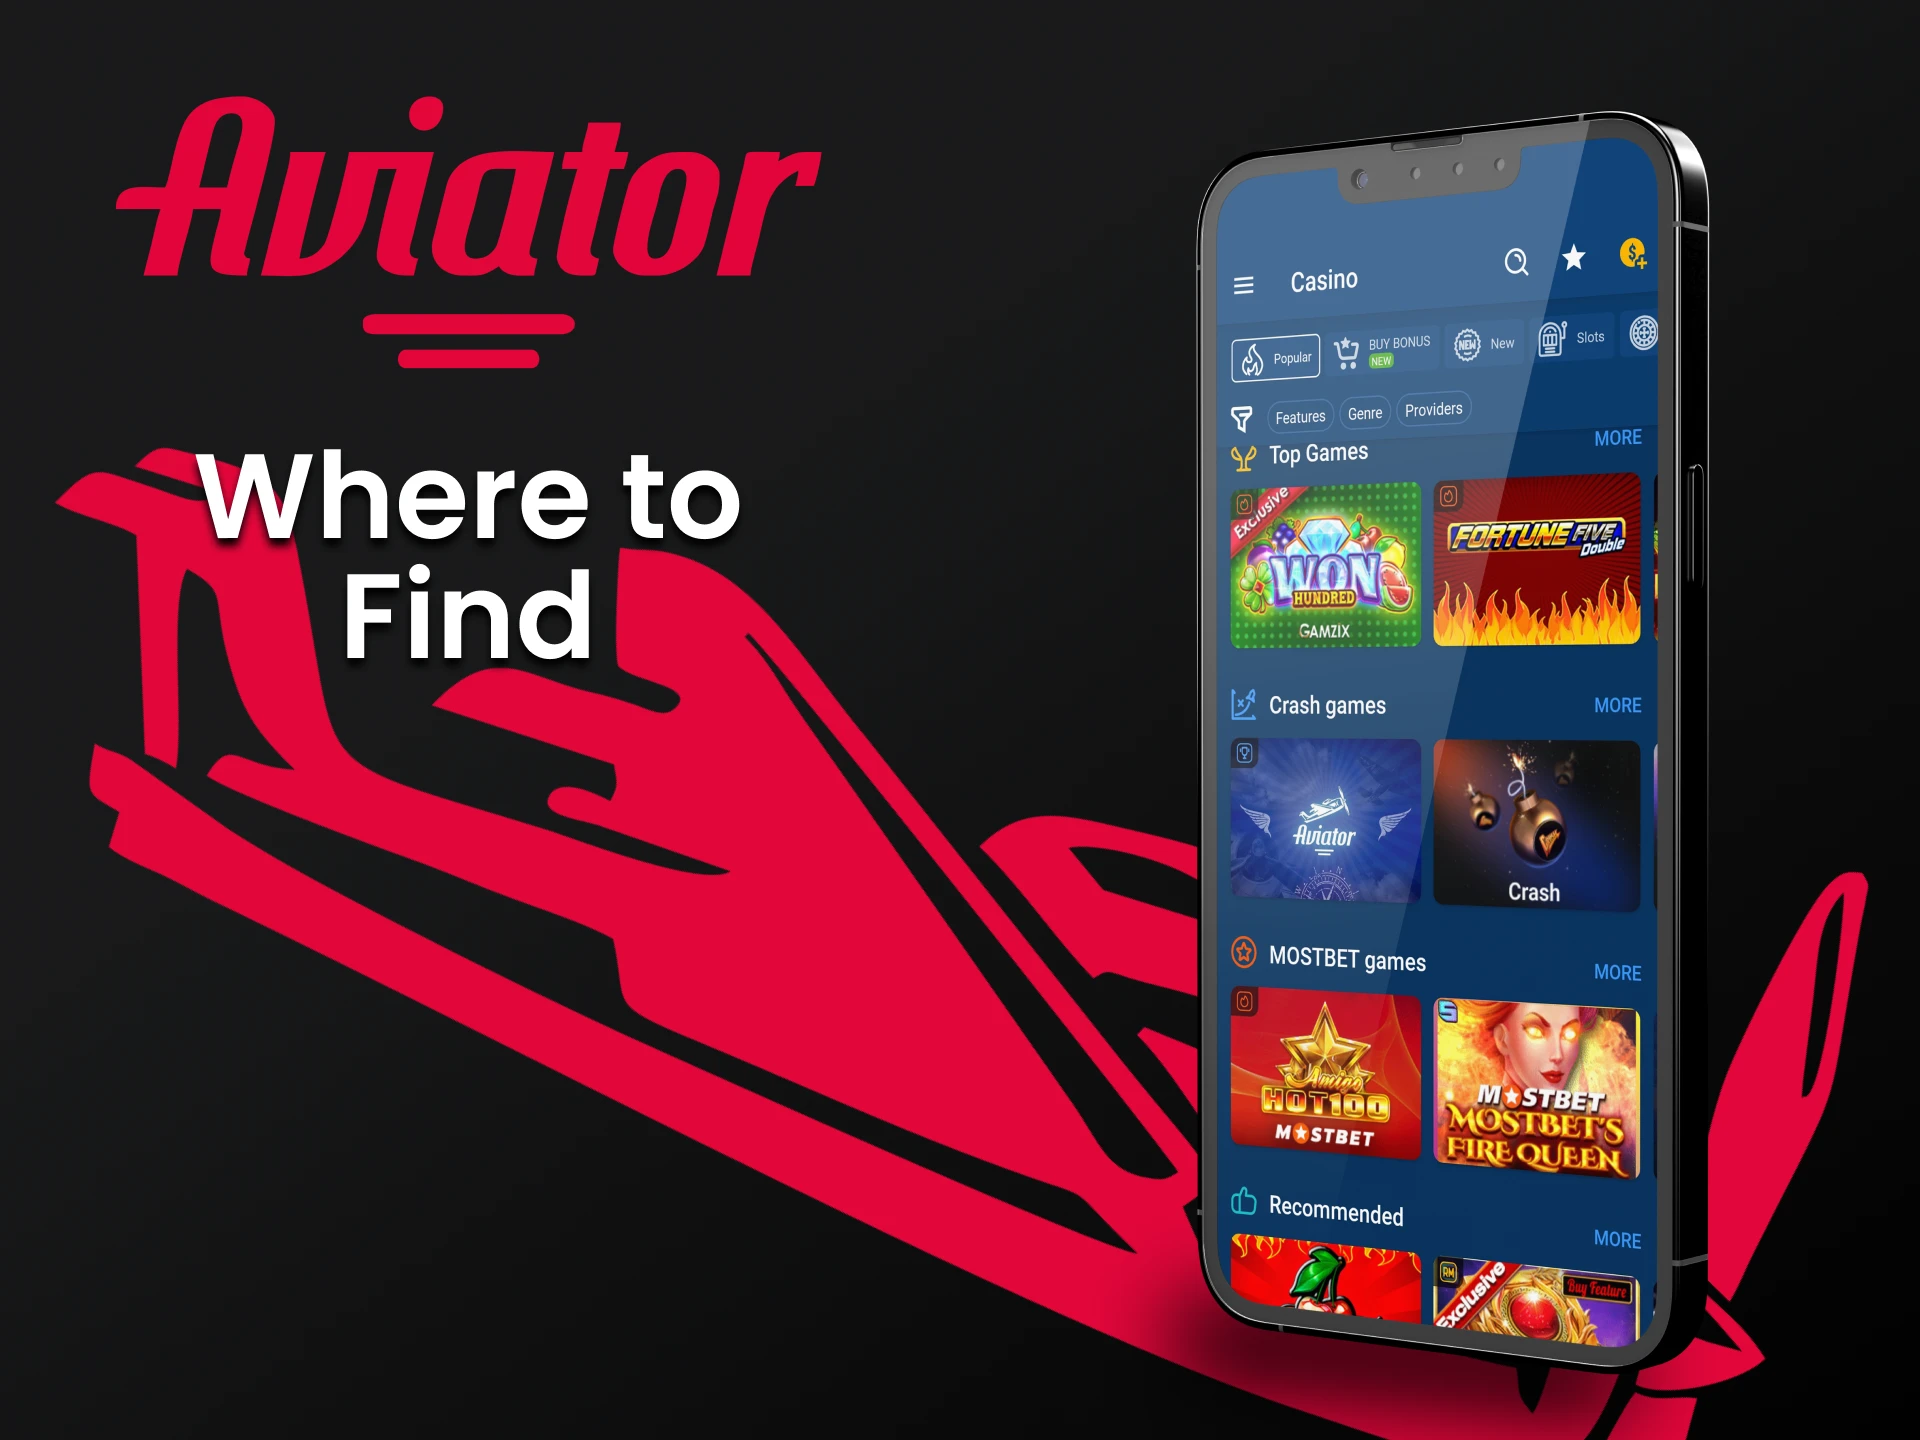 Finding the game Aviator is not difficult in the application from Mostbet.